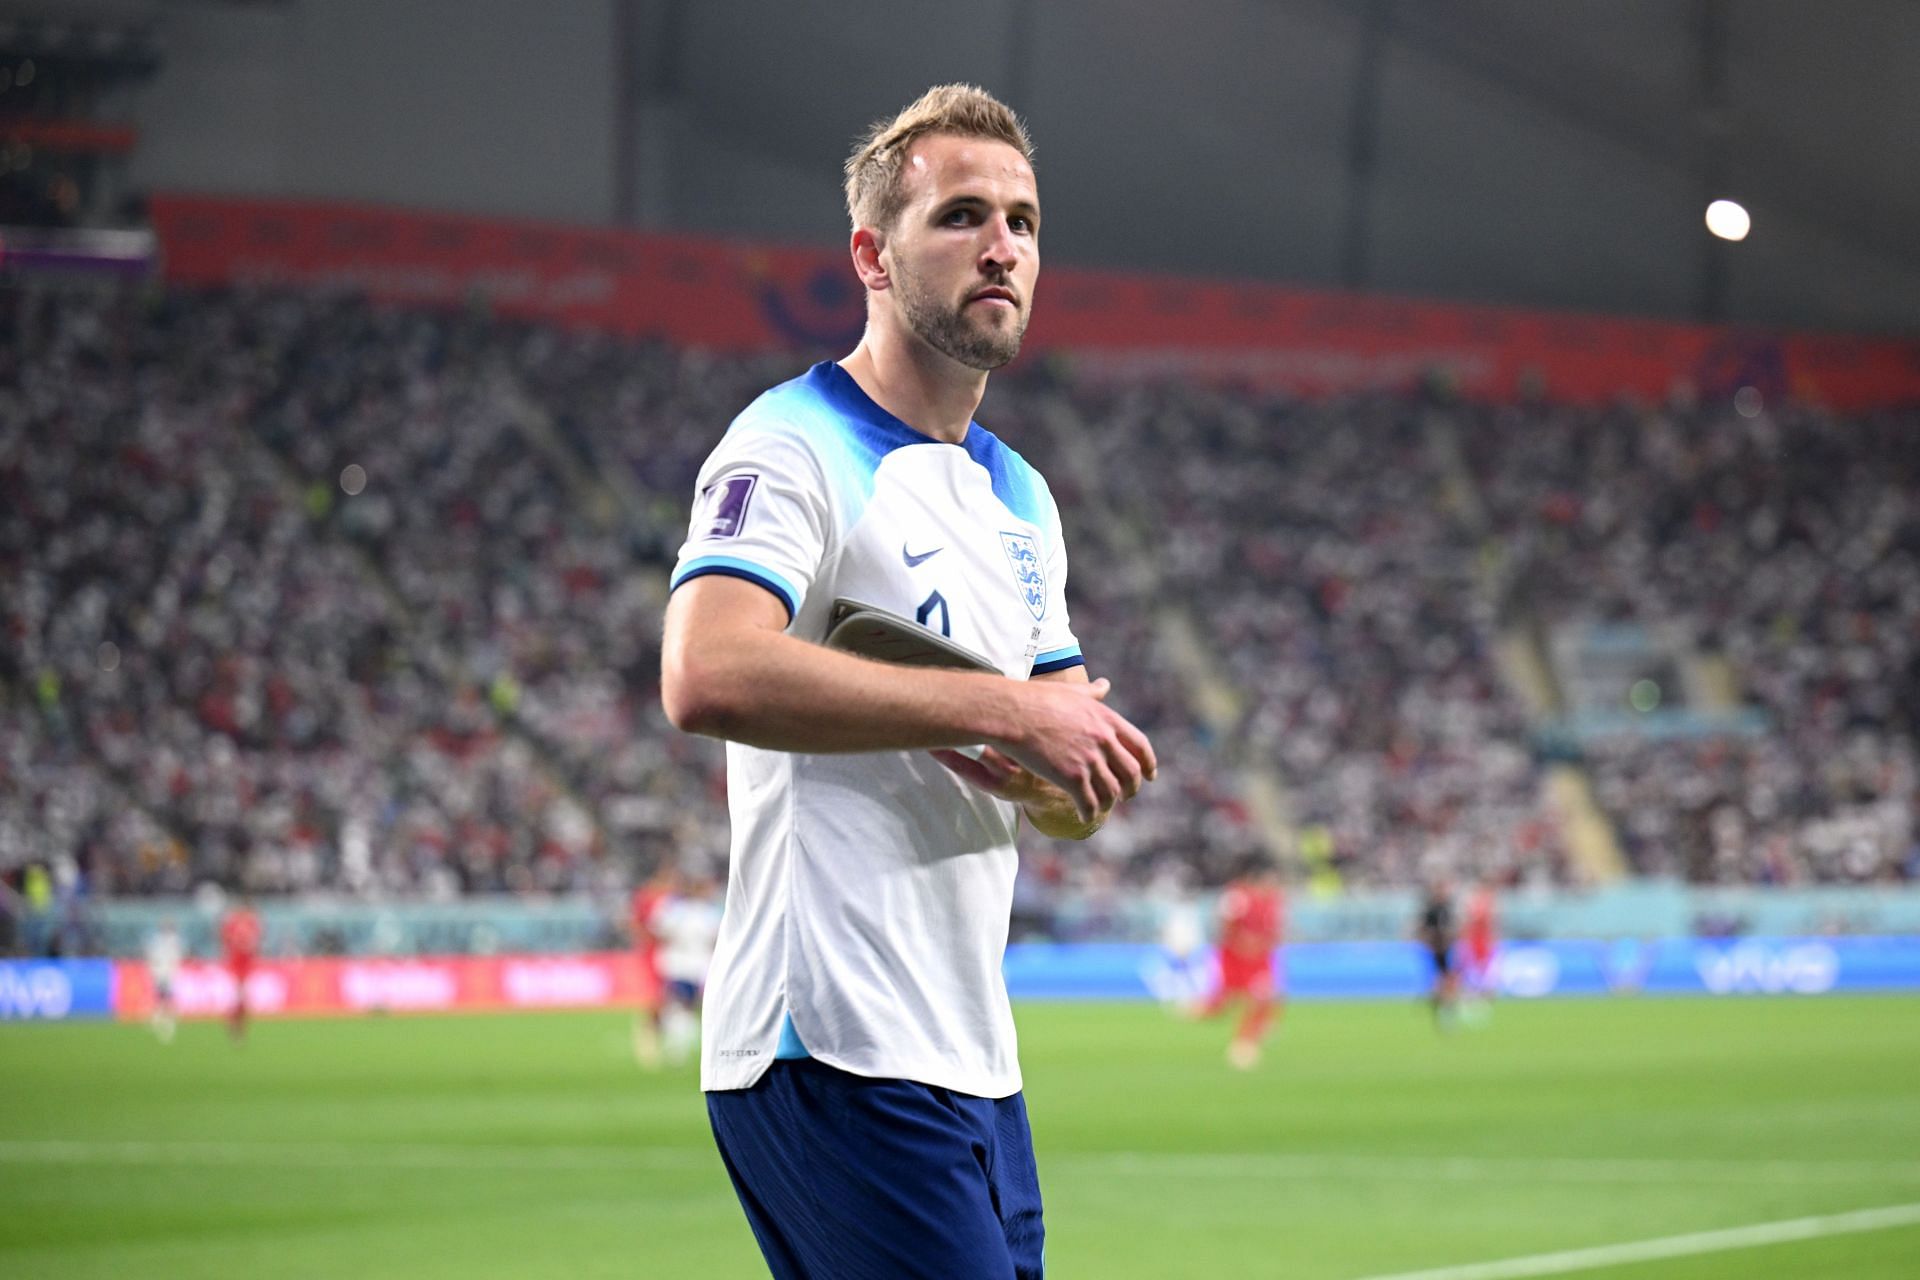 Kane is captaining England at the World Cup